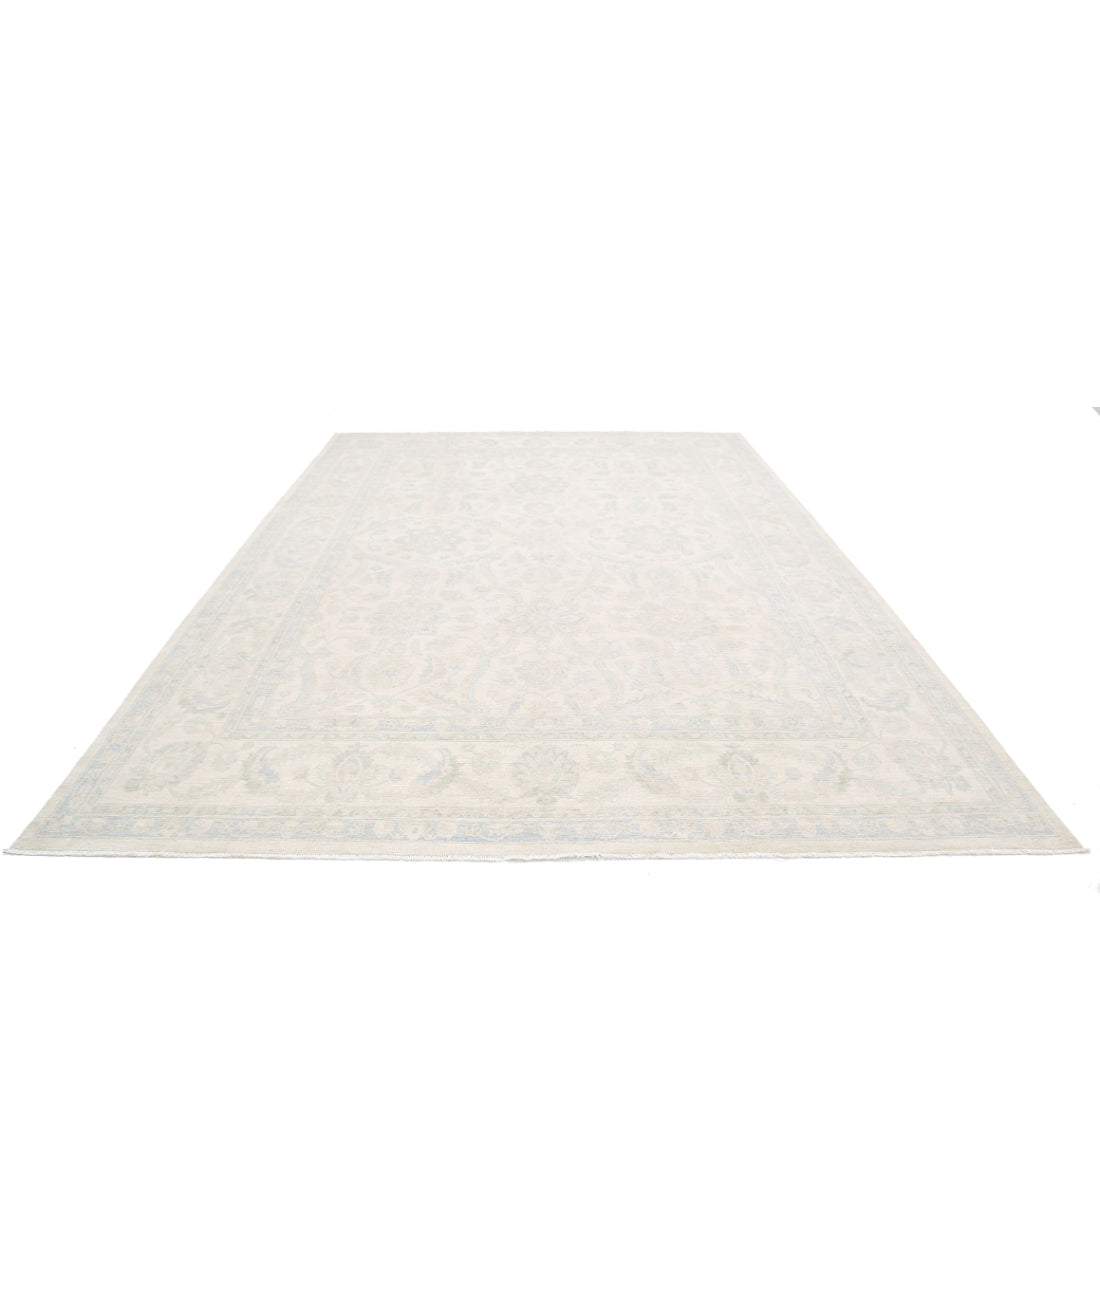 Serenity 10'0'' X 14'2'' Hand-Knotted Wool Rug 10'0'' x 14'2'' (300 X 425) / Ivory / Blue